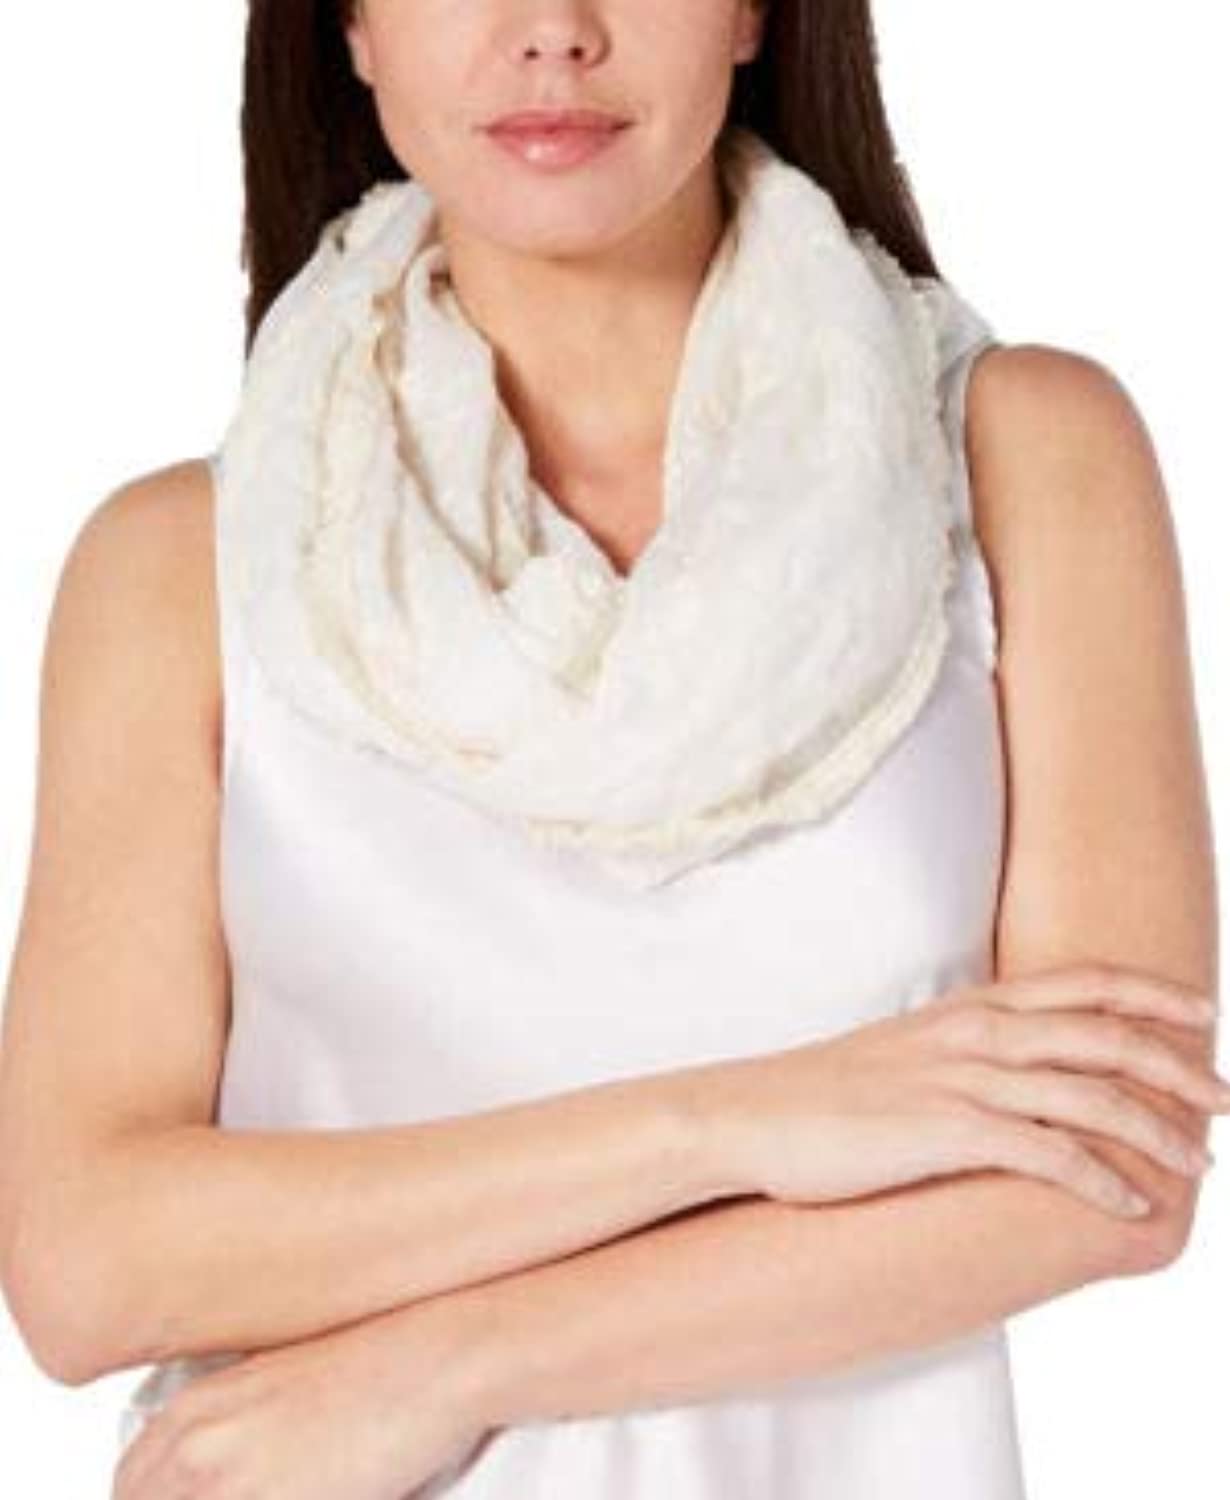 INC International Concepts Womens Embroidered Spring Loop Scarf Color White